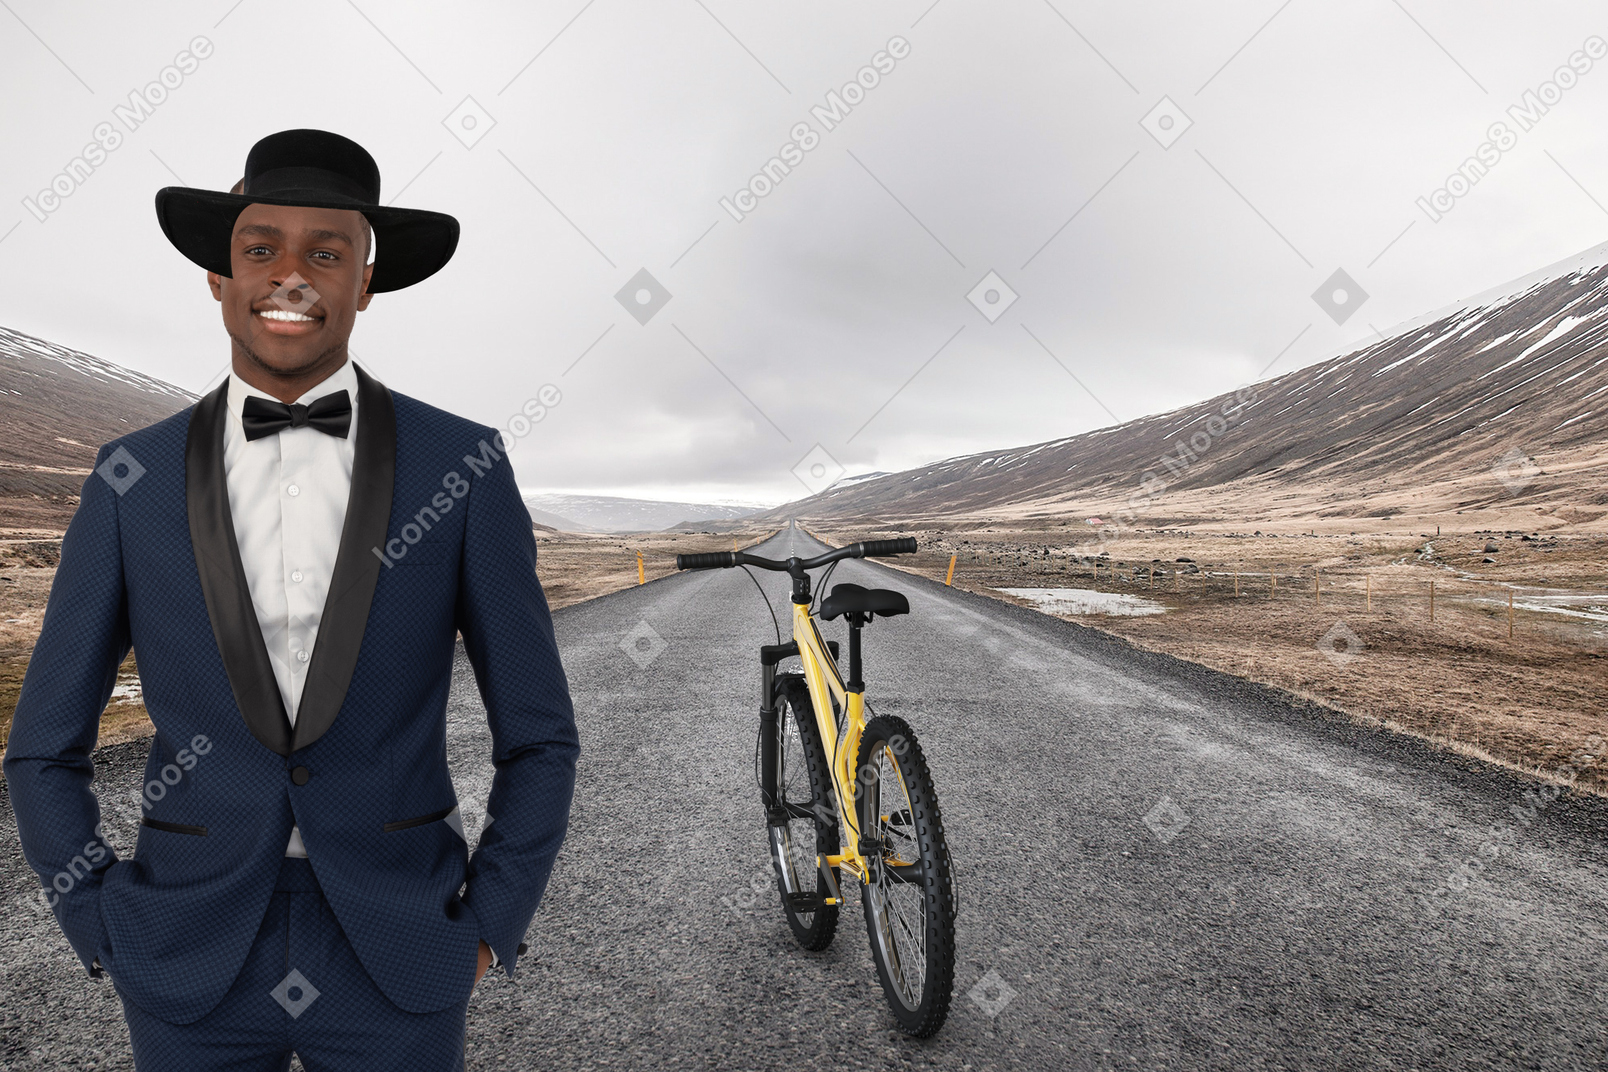 A man in a suit and hat standing next to a bike